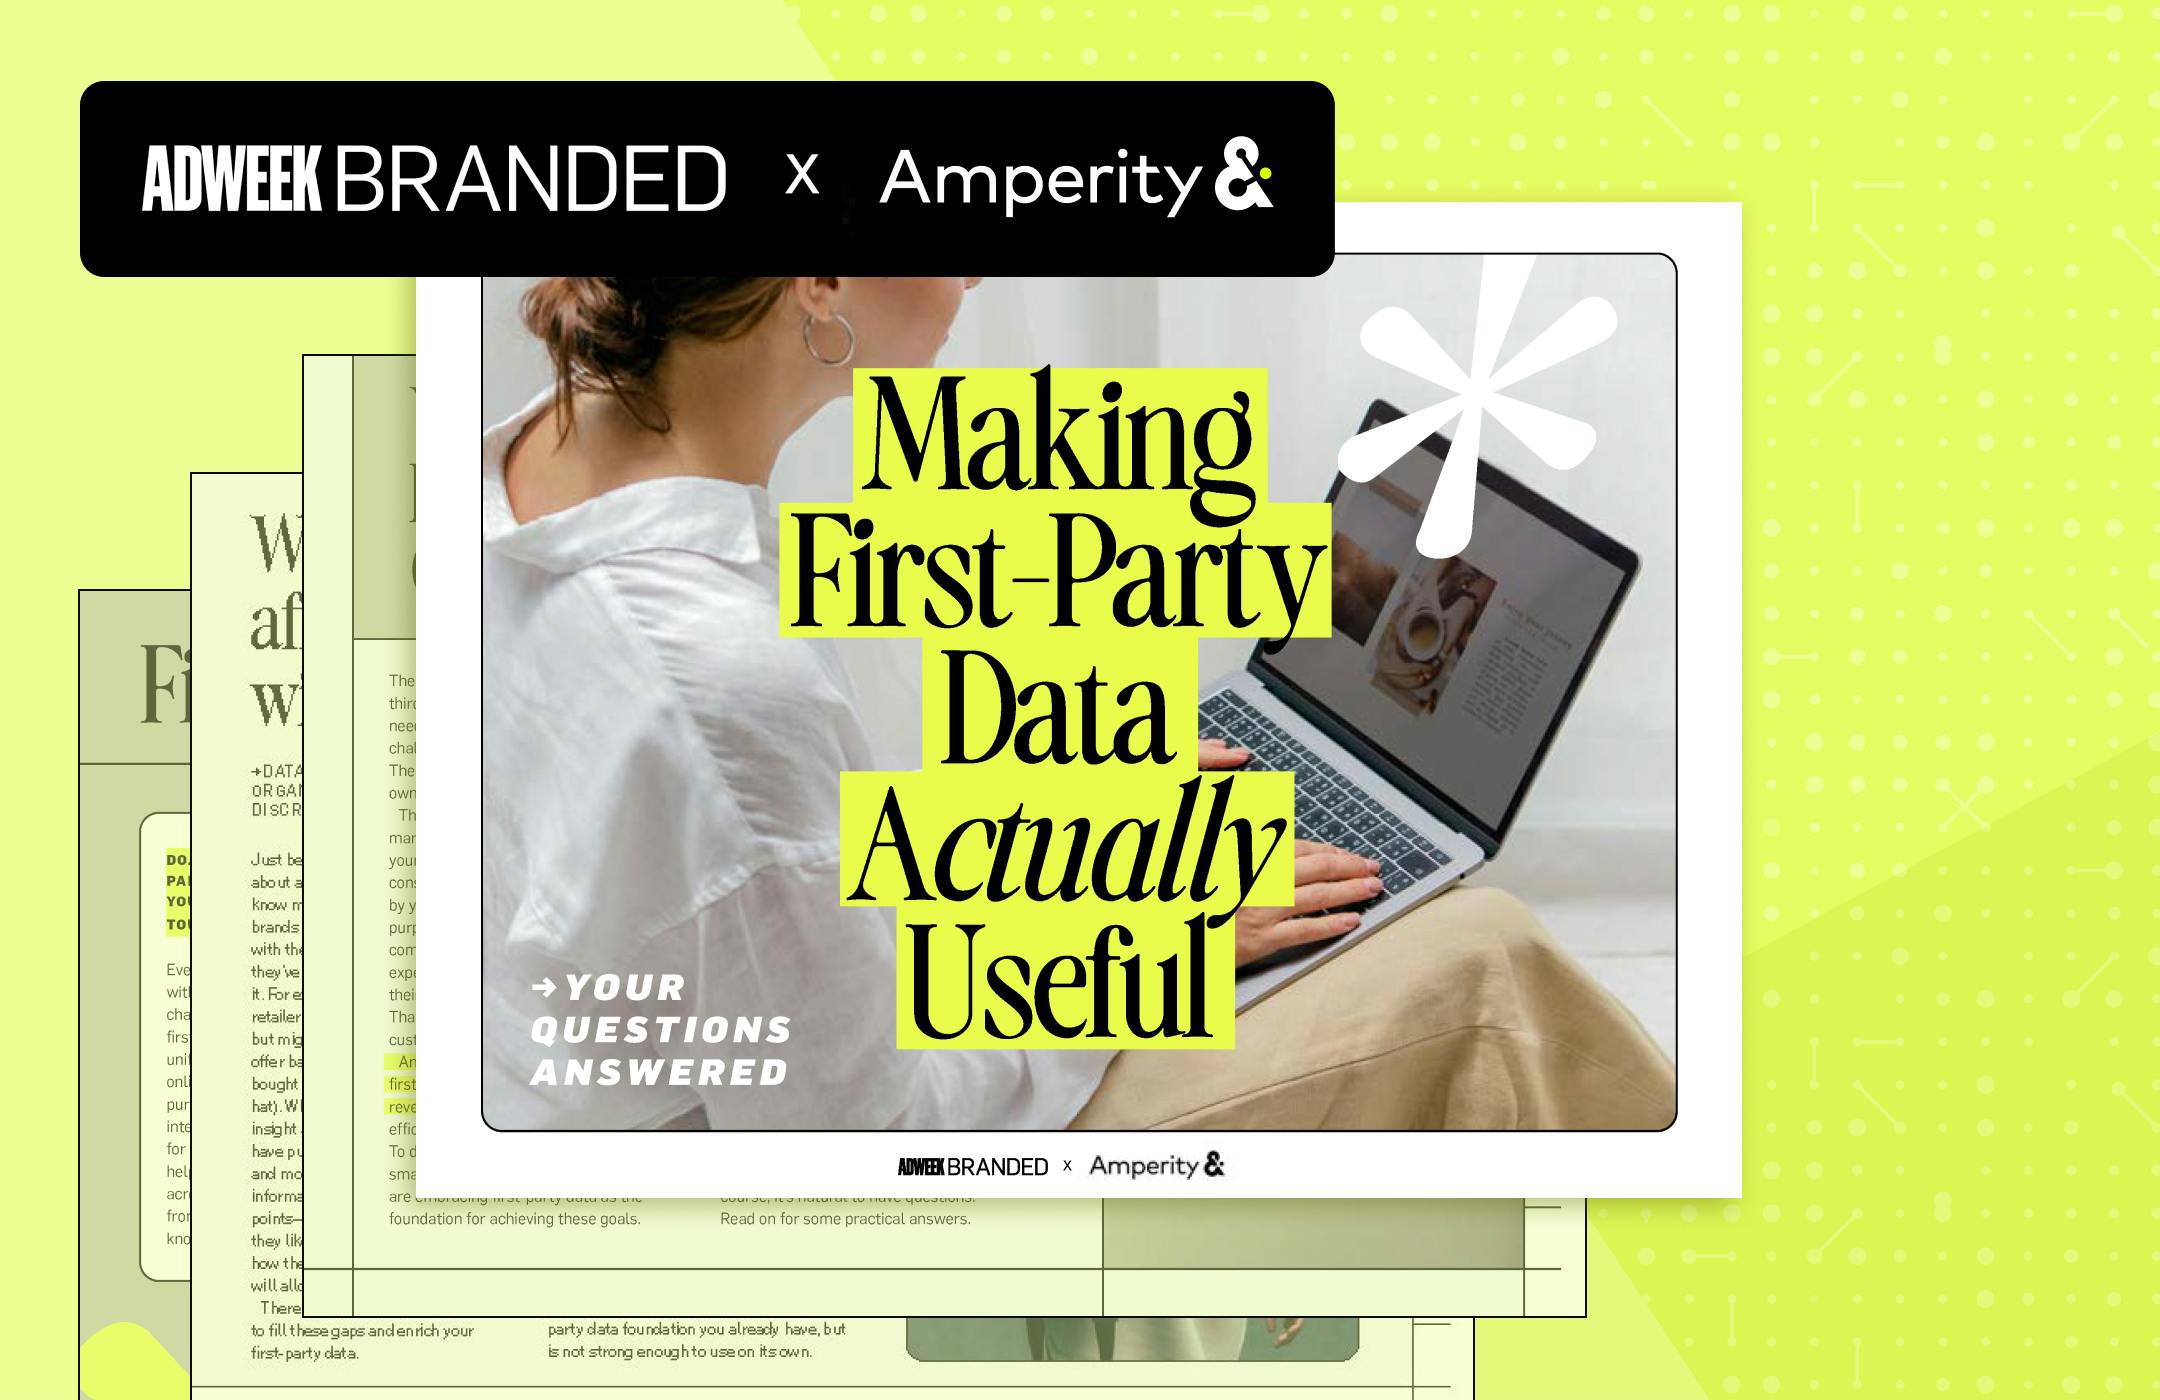 AdWeek Guide - Making First-Party Data Actually Useful